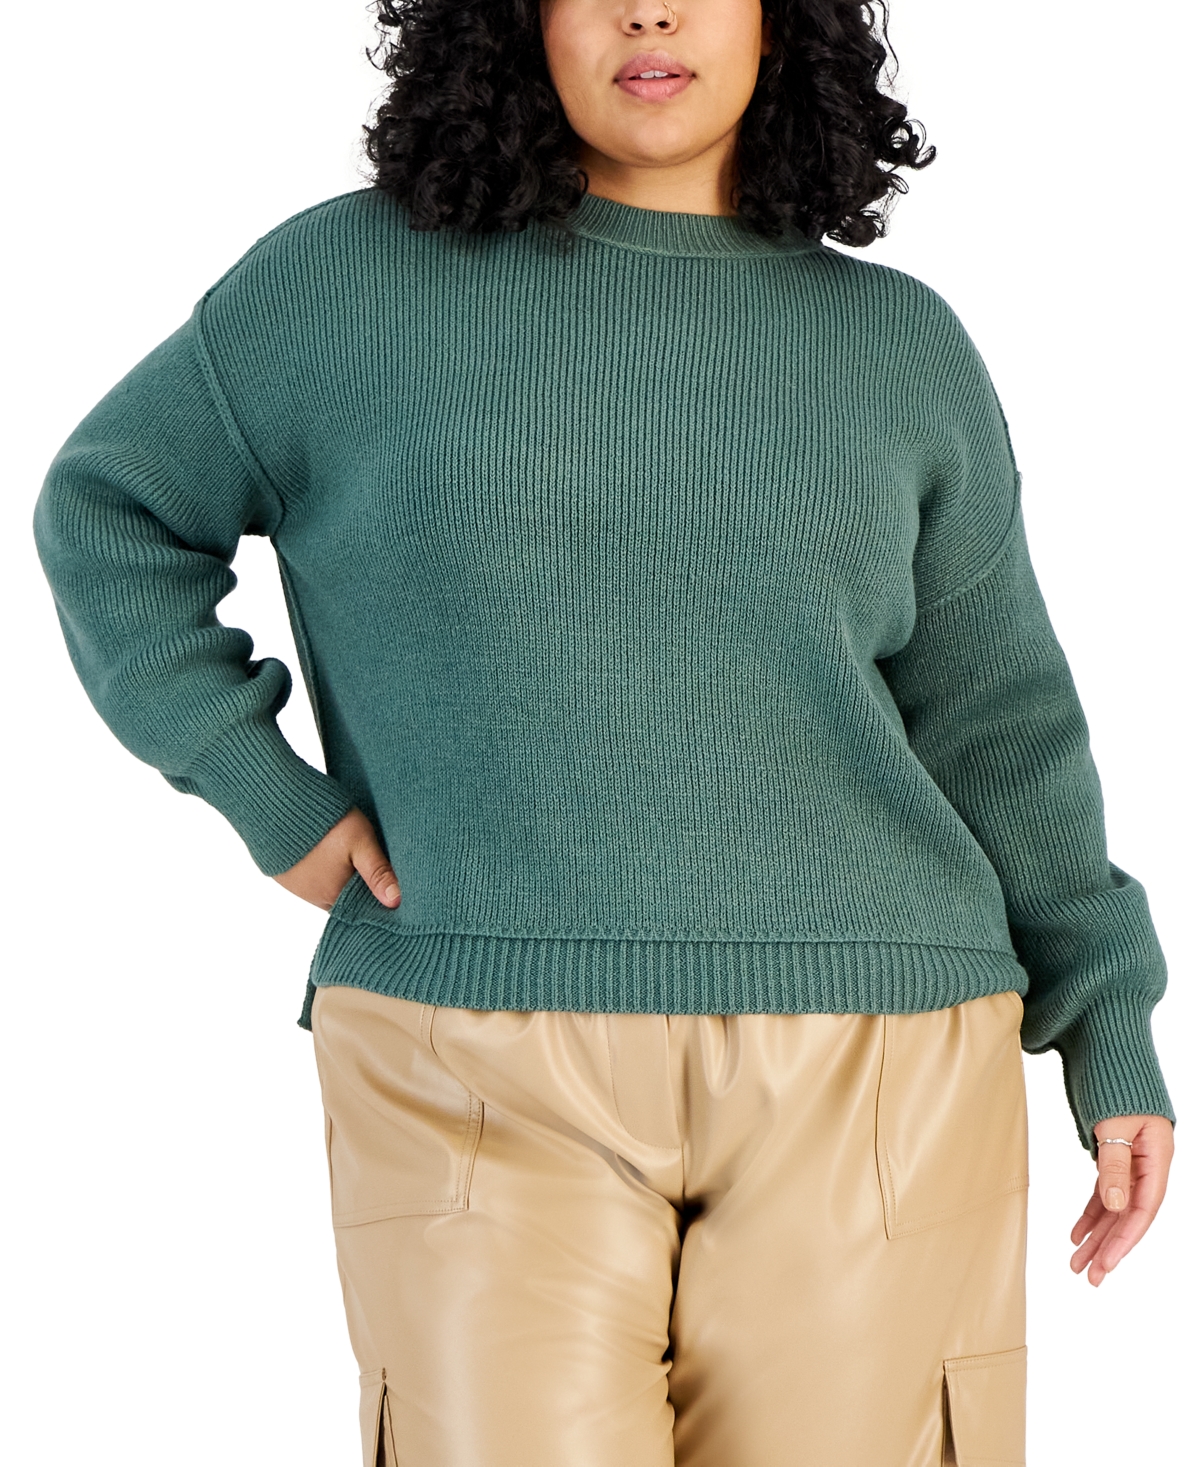 And Now This Trendy Plus Size Seam Sweater In Meadowland